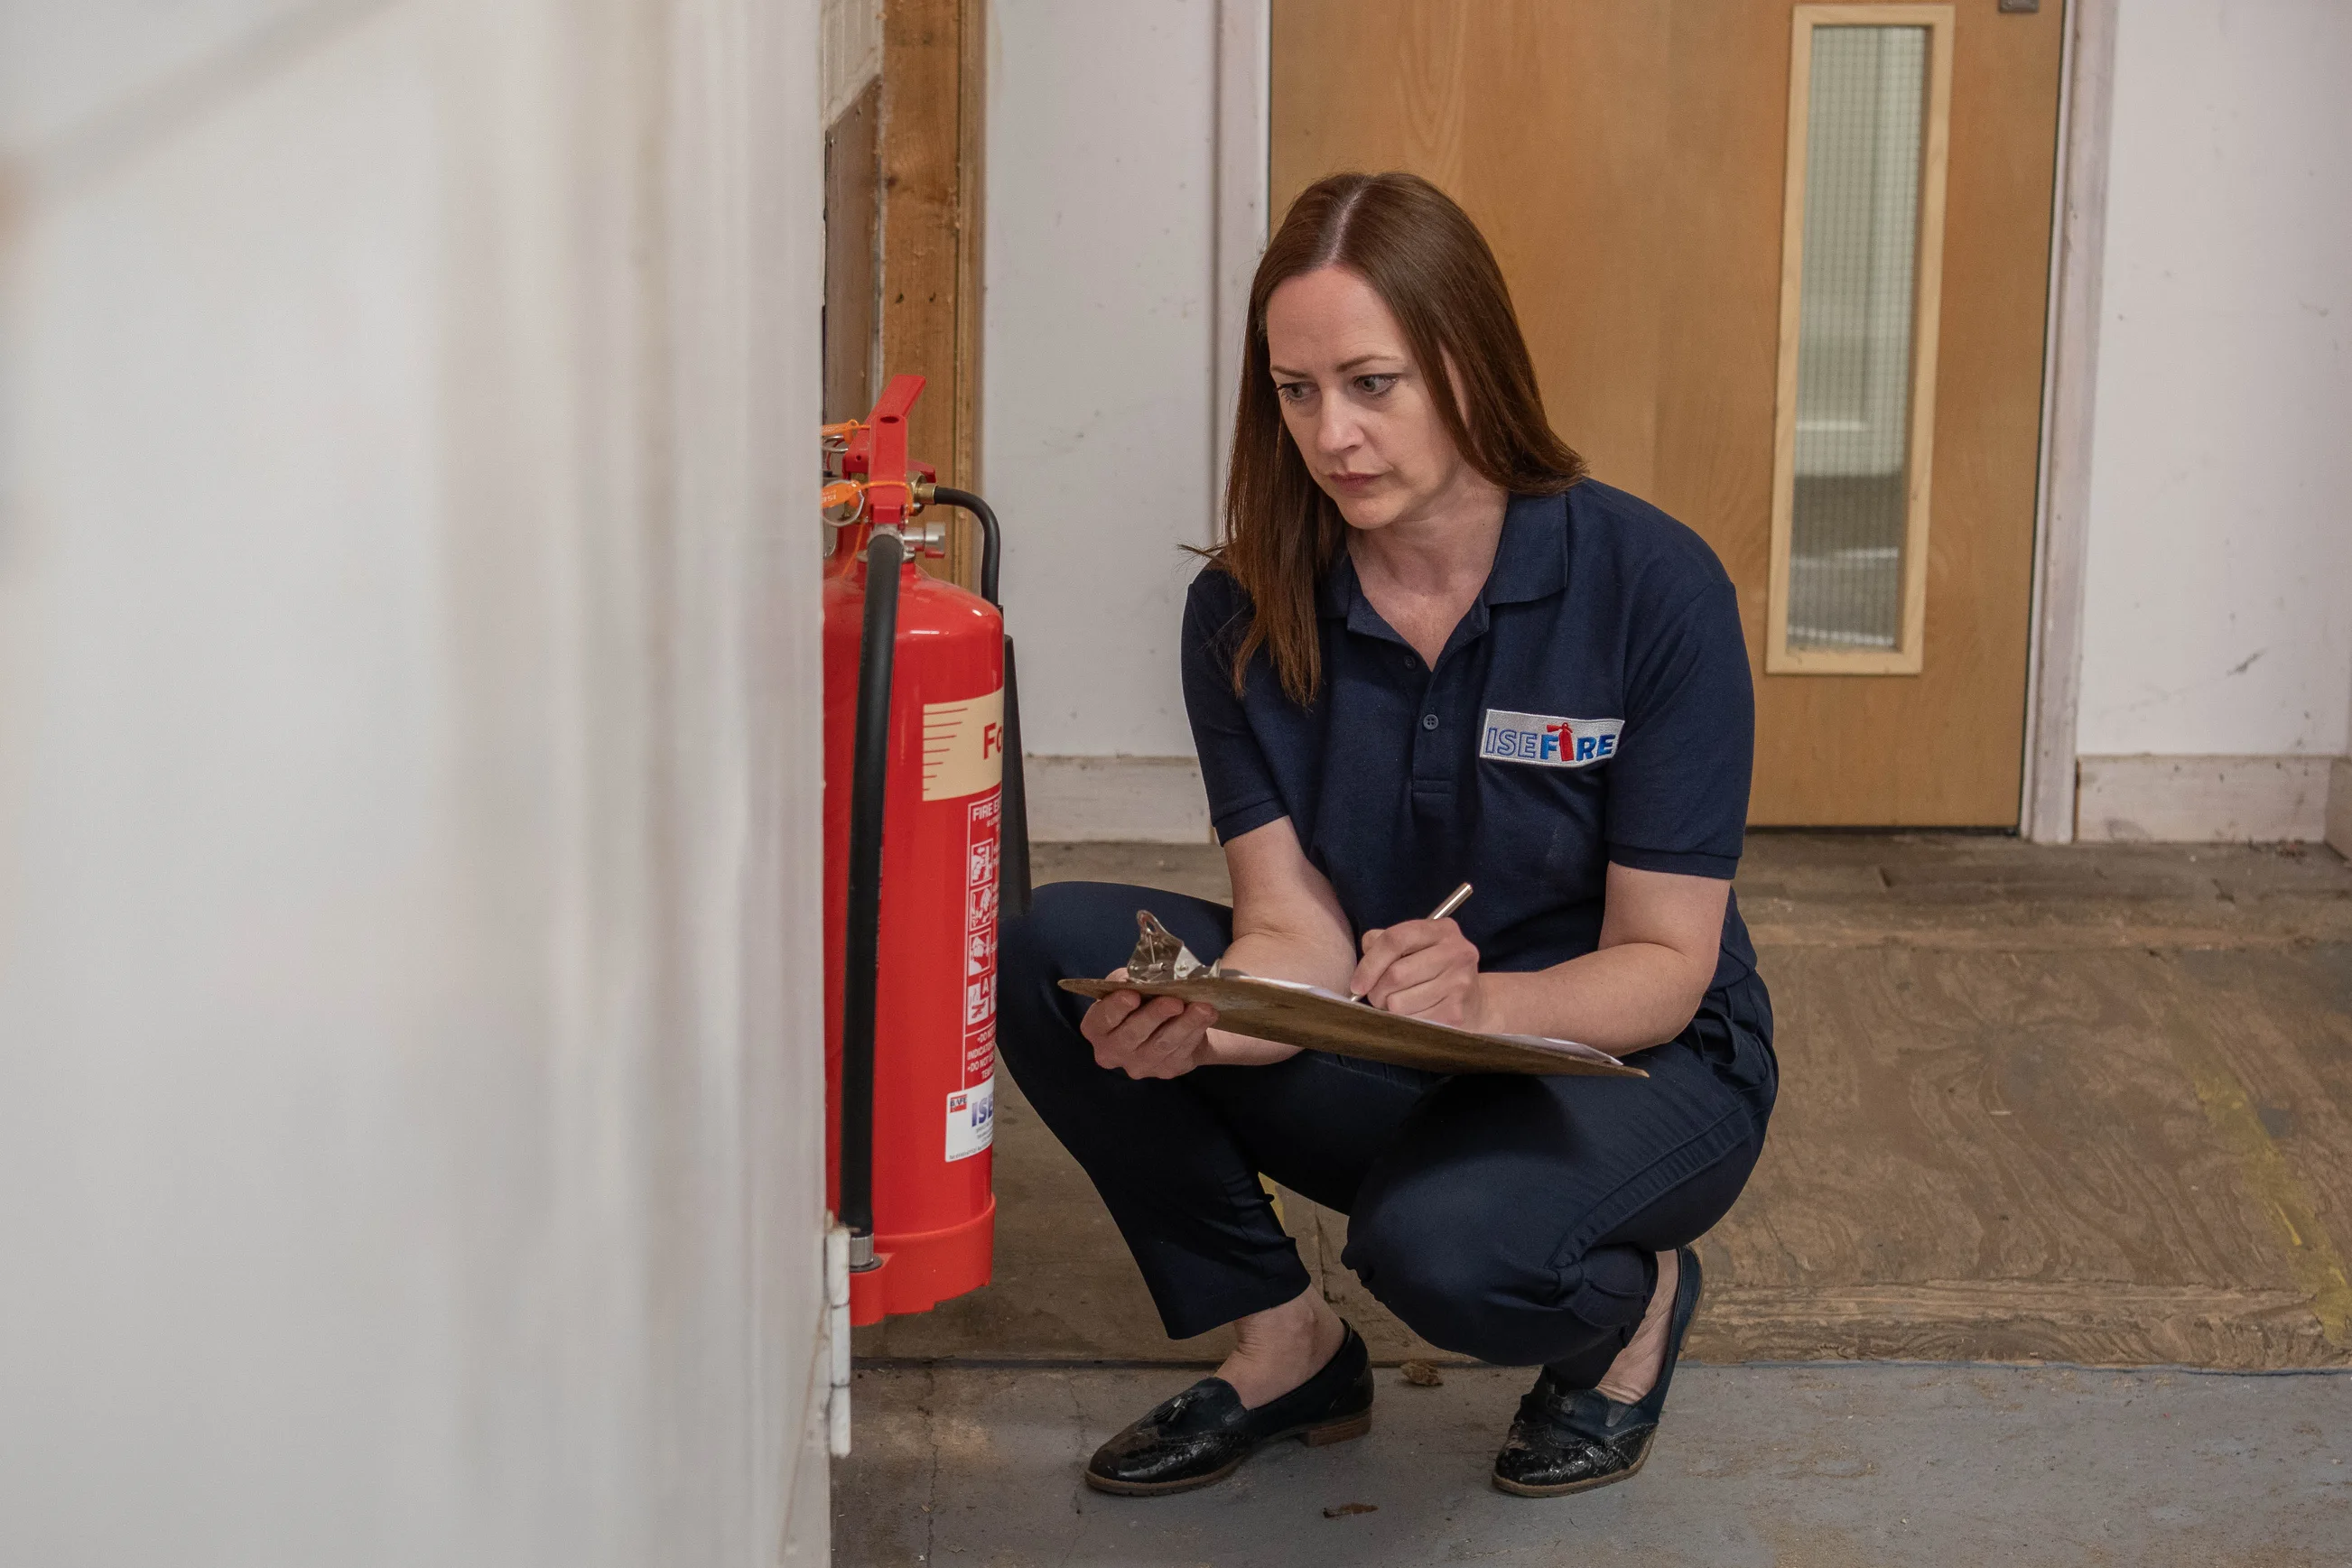 ISE Fire engineer performing an Fire Risk Assessment by inspecting a fire extinguisher.